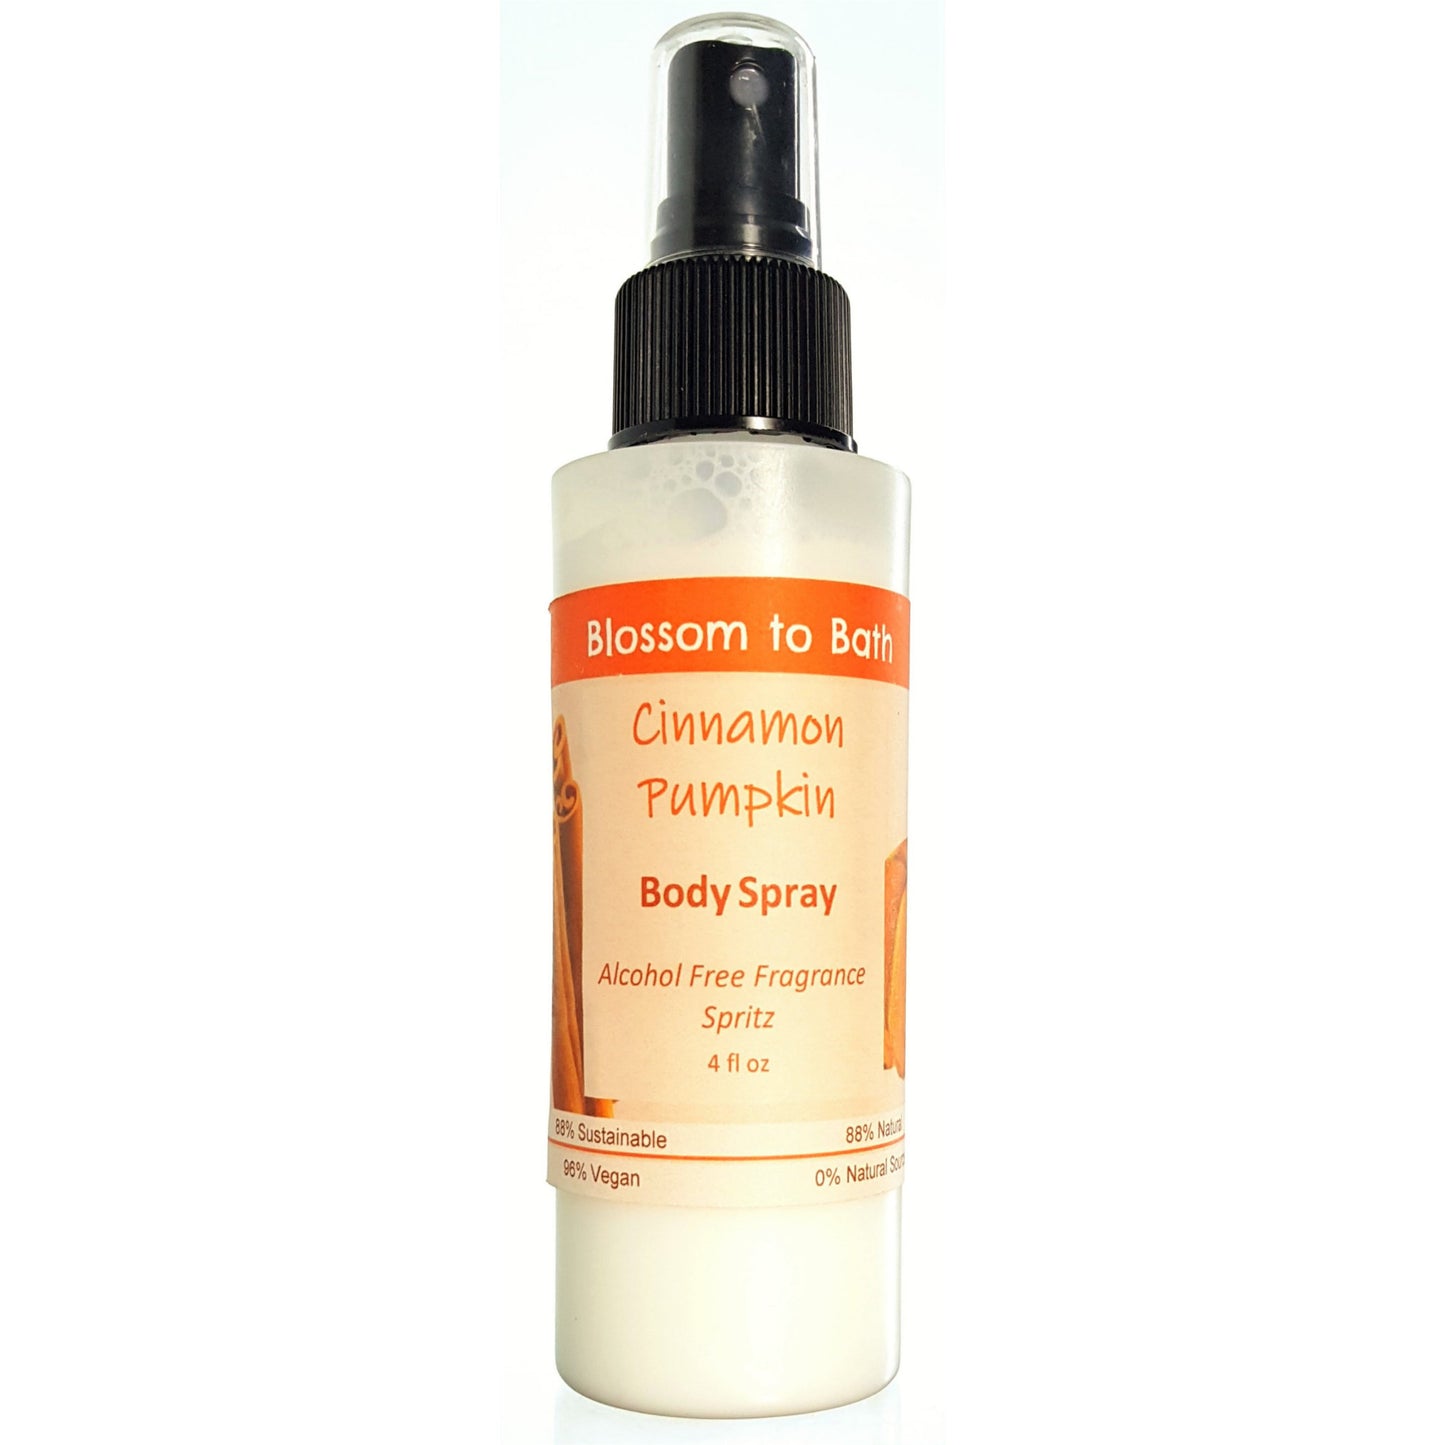 Buy Blossom to Bath Cinnamon Pumpkin Body Spray from Flowersong Soap Studio.  Natural  freshening of skin, linens, or air  An engaging, cheerful scent filled with sweet vanilla and warm spice.